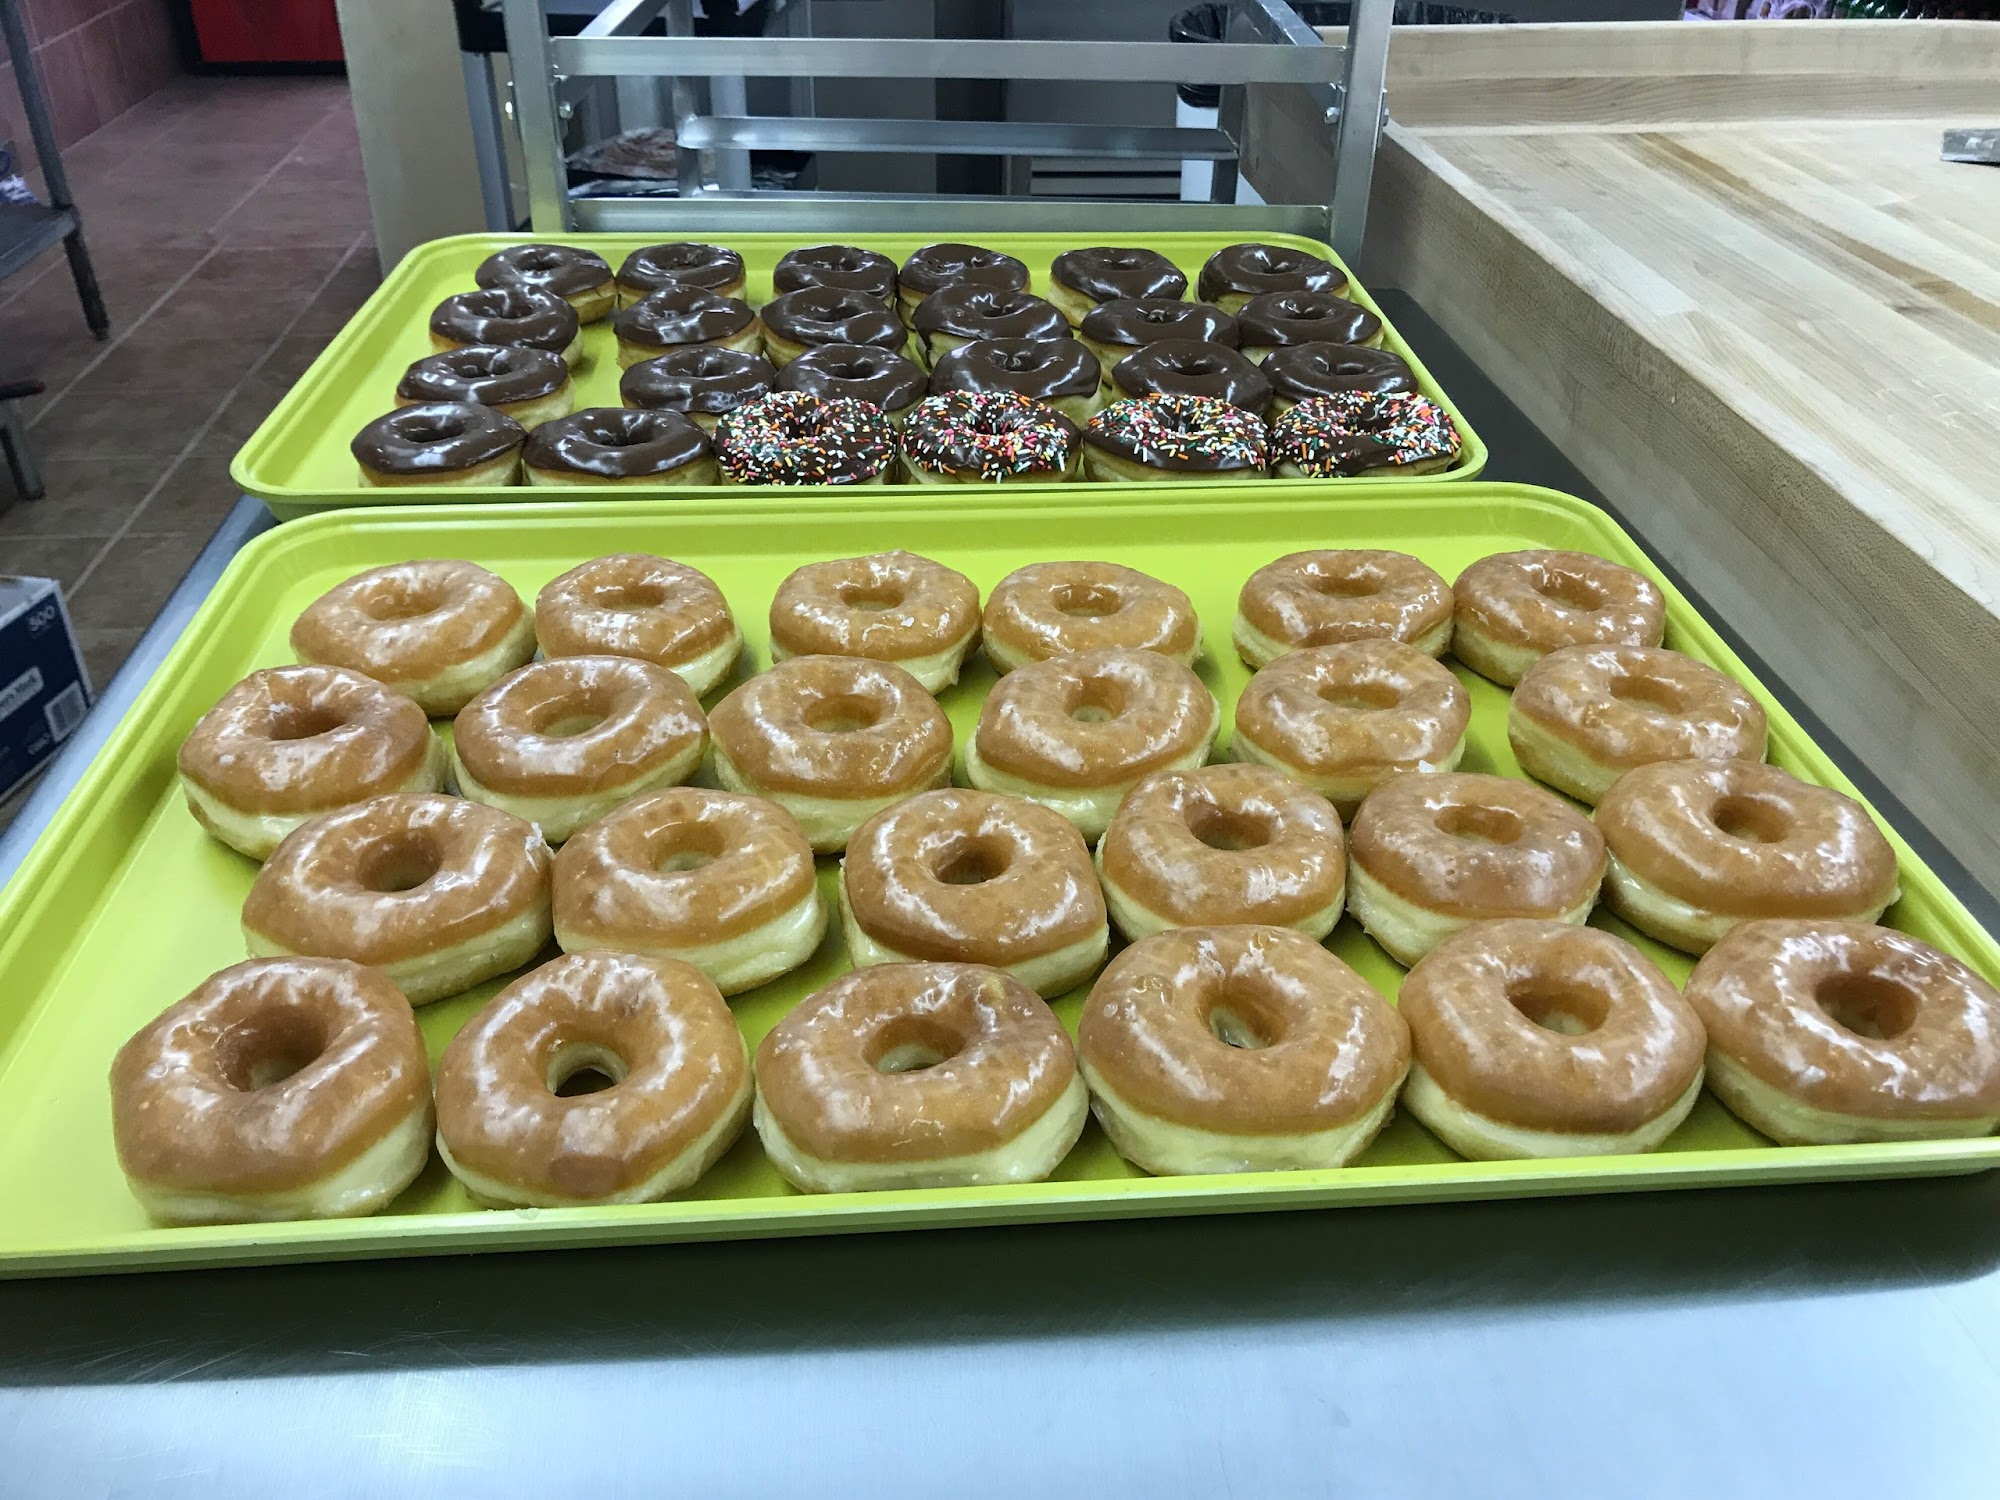 Southern Maid Donuts